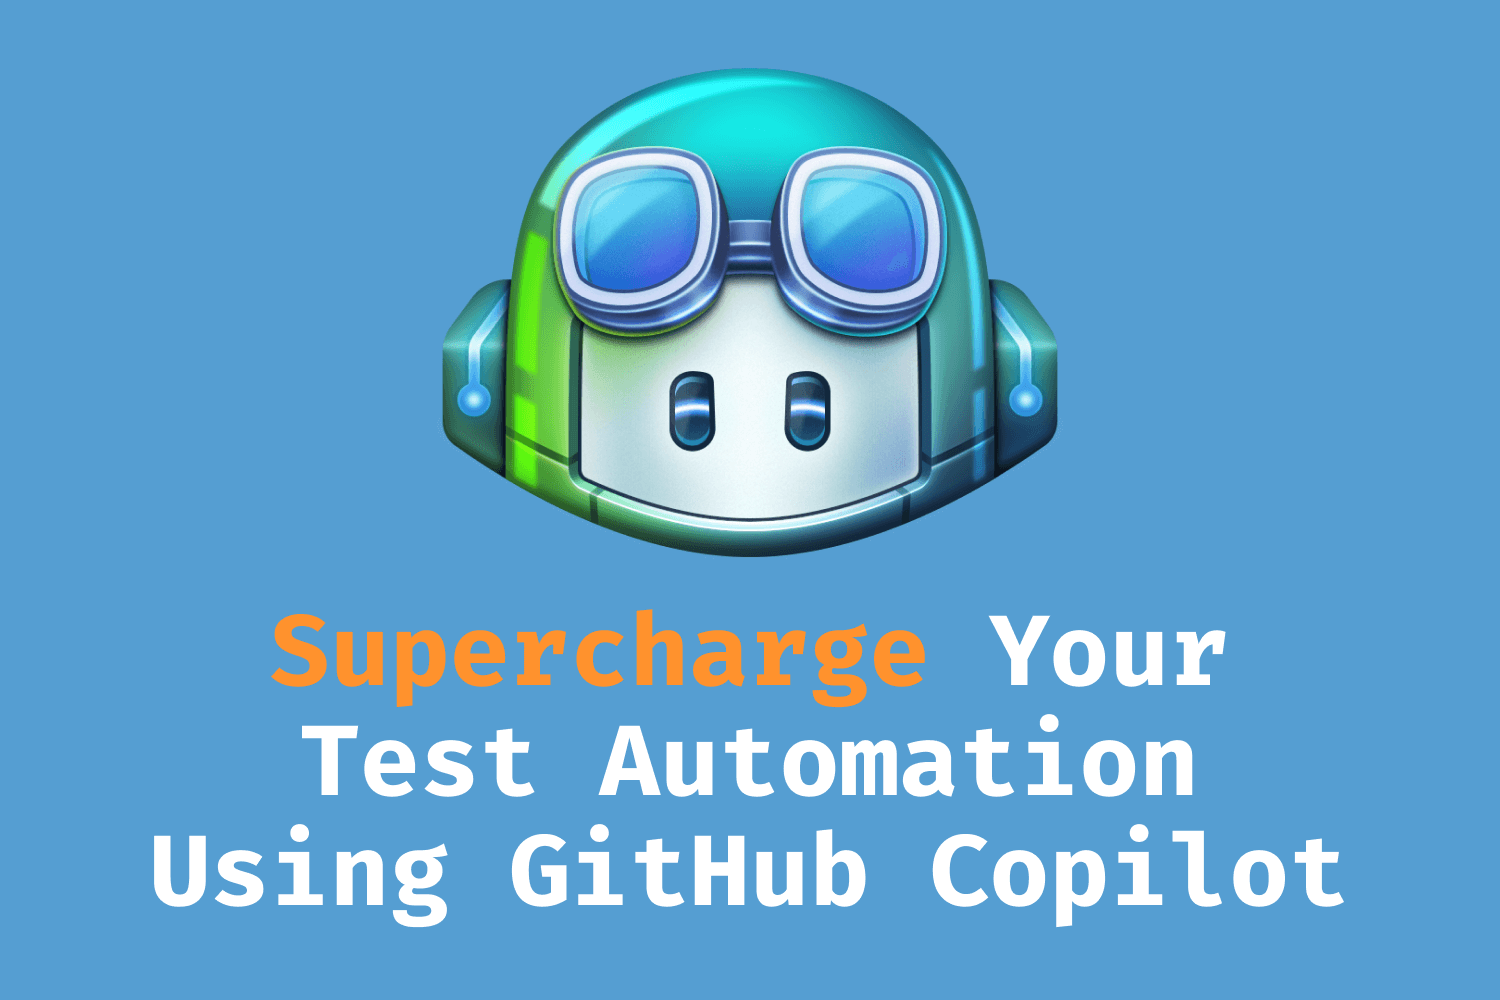 Supercharge Your Test Automation Using GitHub Copilot